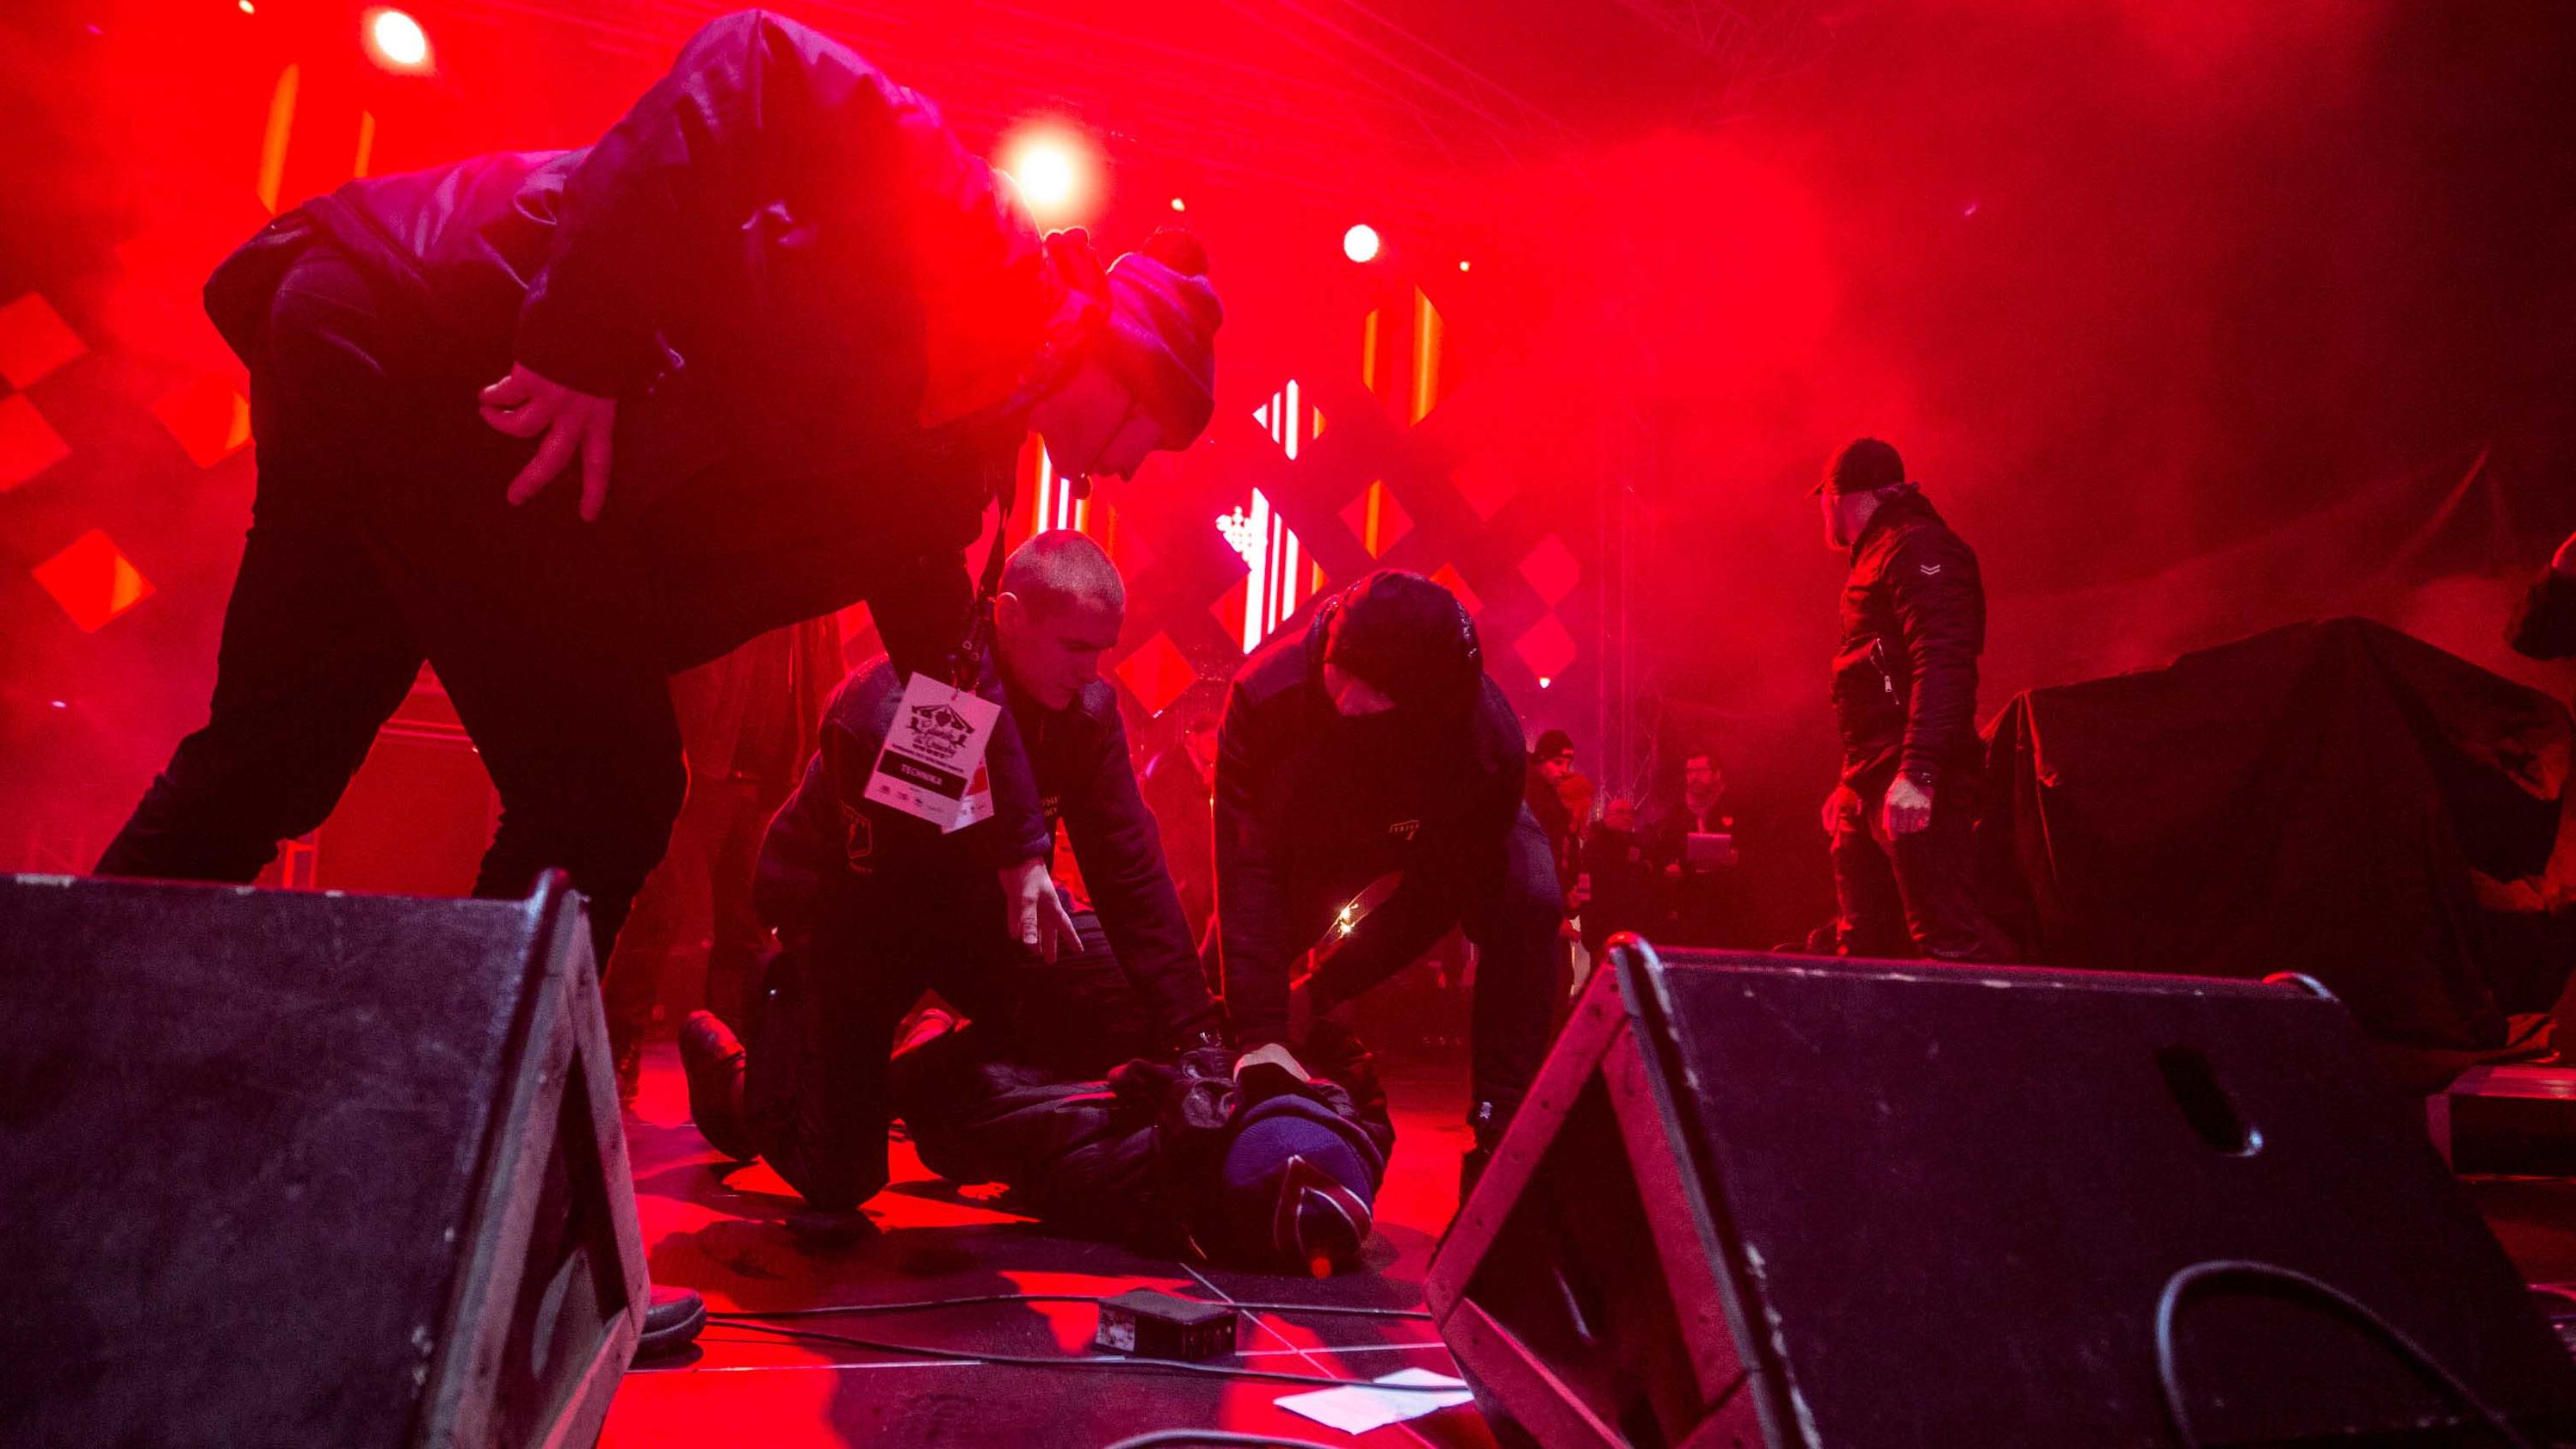 Security personnel hold down the suspect after he attacked Adamowicz.